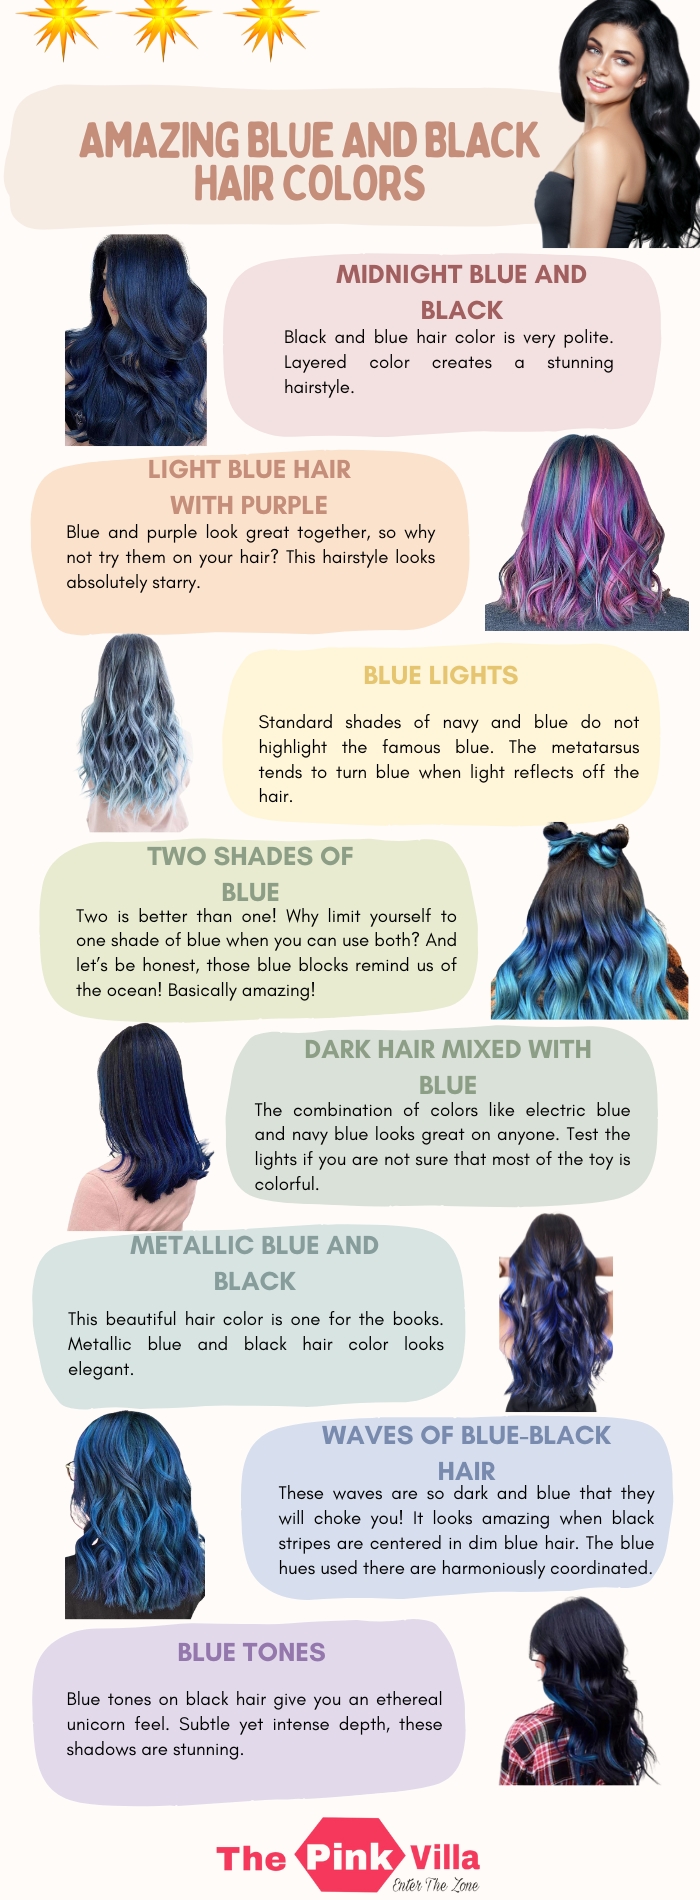 Amazing Blue and Black Hair Colors